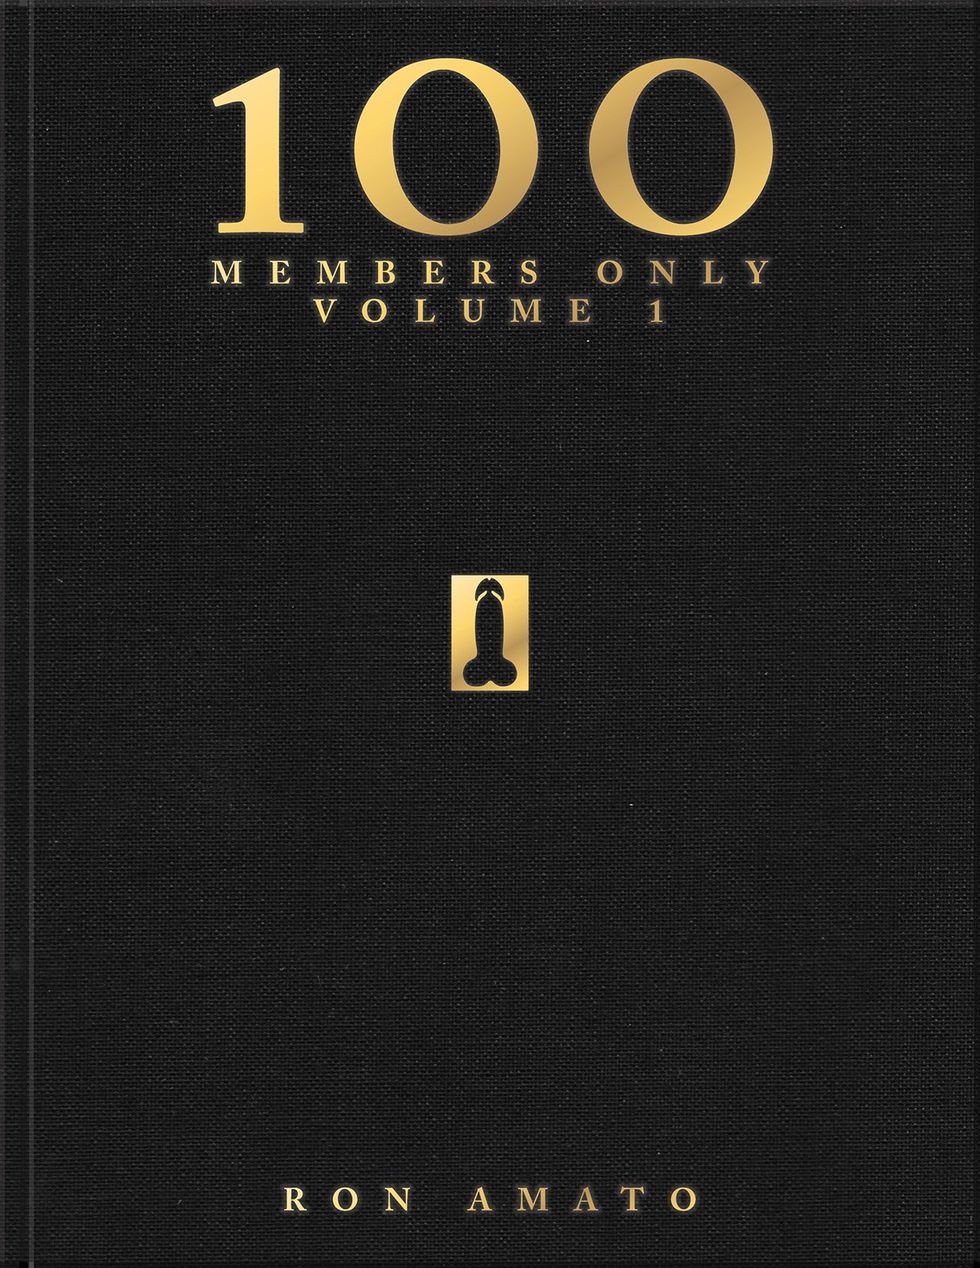 100 Members only book cover